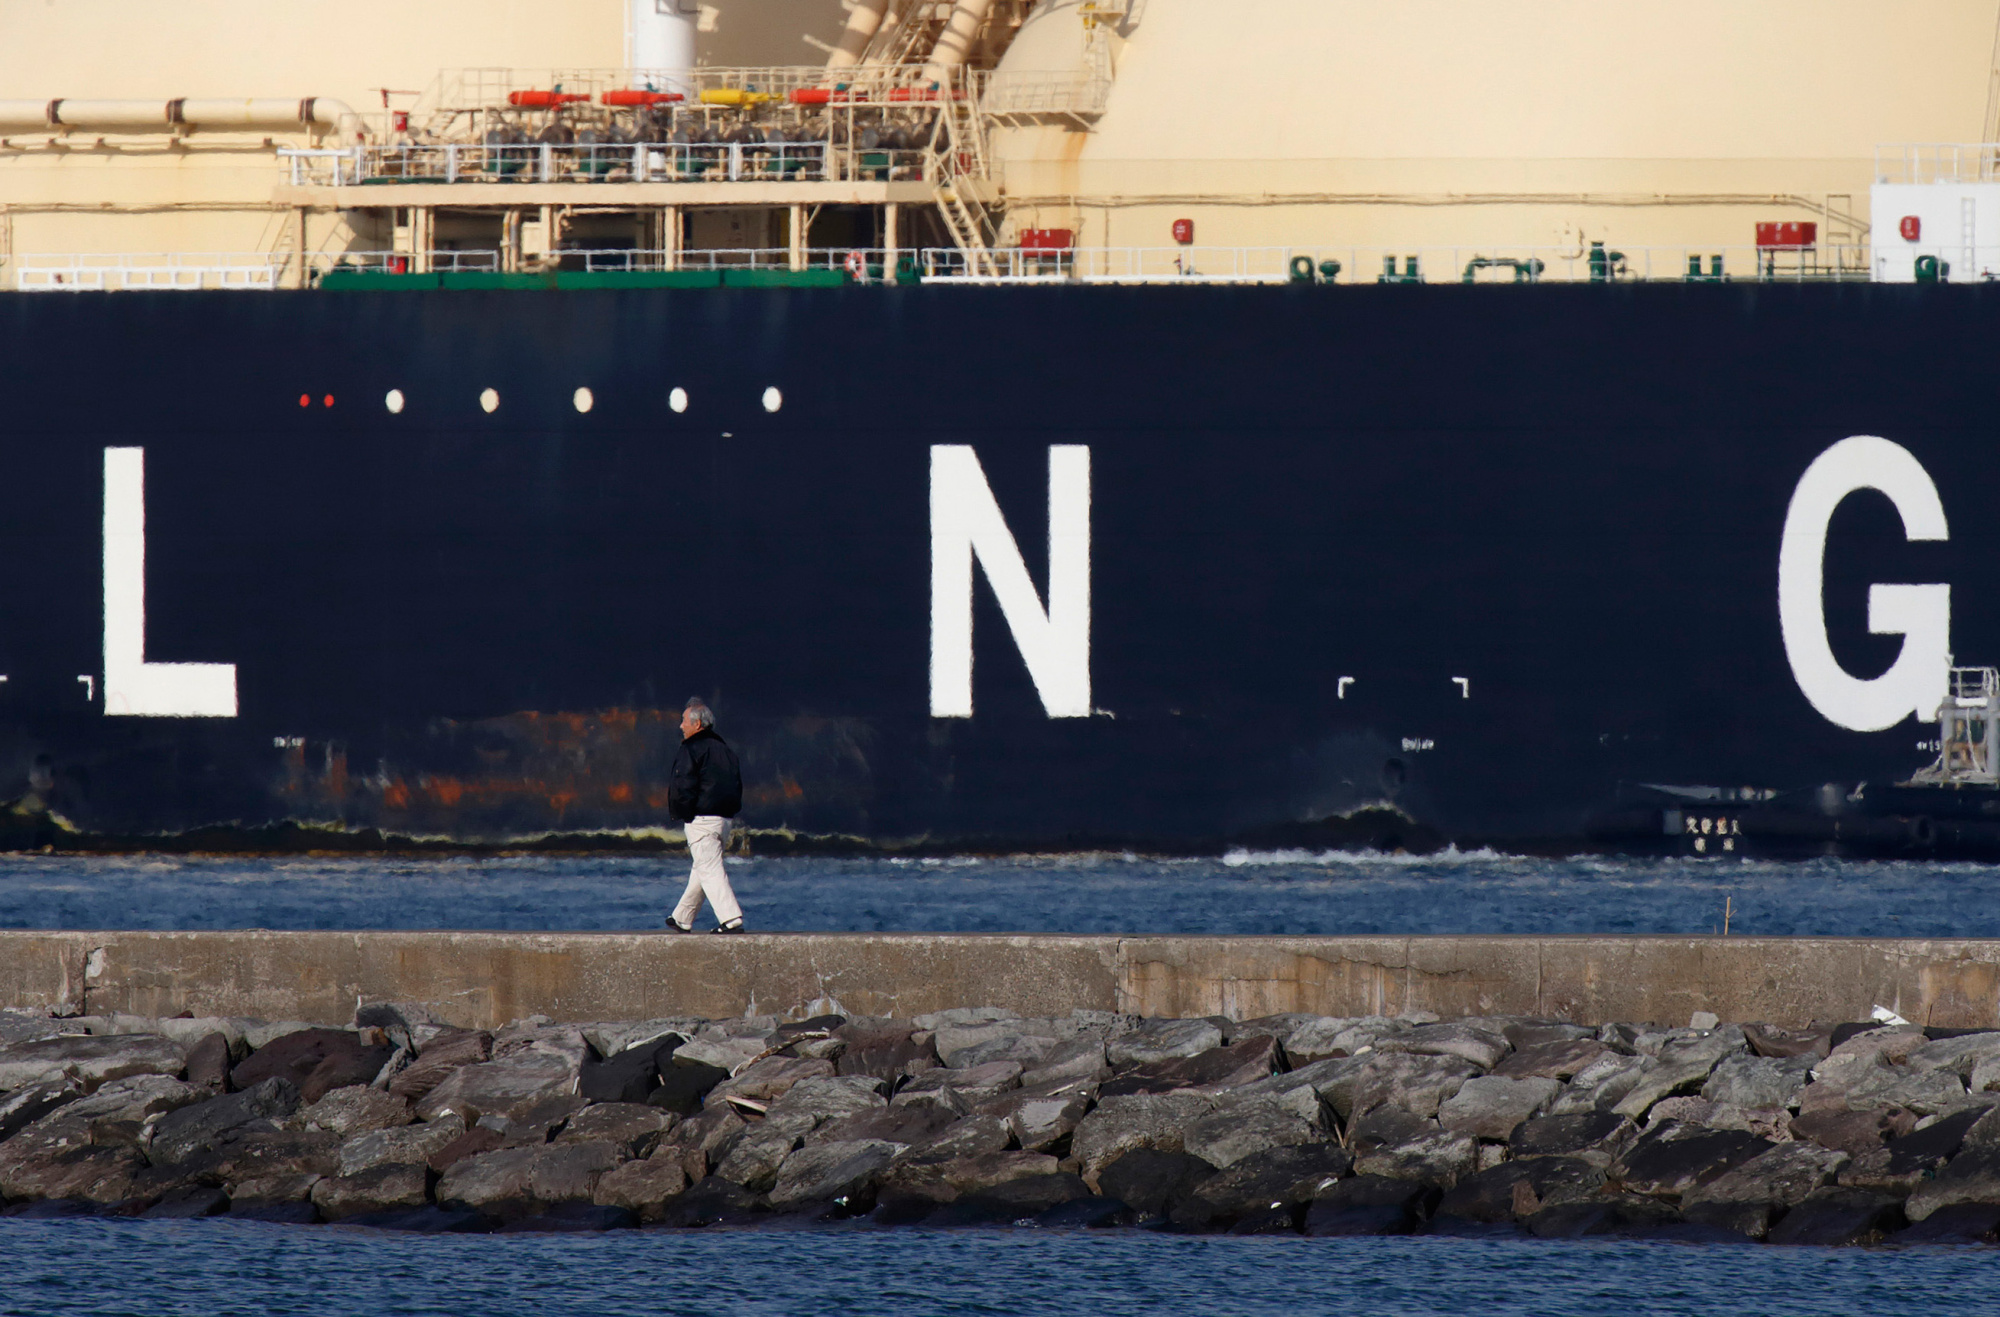 A man walks past the Shahamah liquefied natural gas (LNG) tanker sitting berthed at Tokyo Electric Power Co.'s (Tepco) Futtsu gas-fired thermal power plant in Futtsu Chiba Prefecture, Japan, on Thursday, Jan. 21, 2016. The Ministry of Finance is scheduled to release Japan's fuel trading data on Jan. 25.
